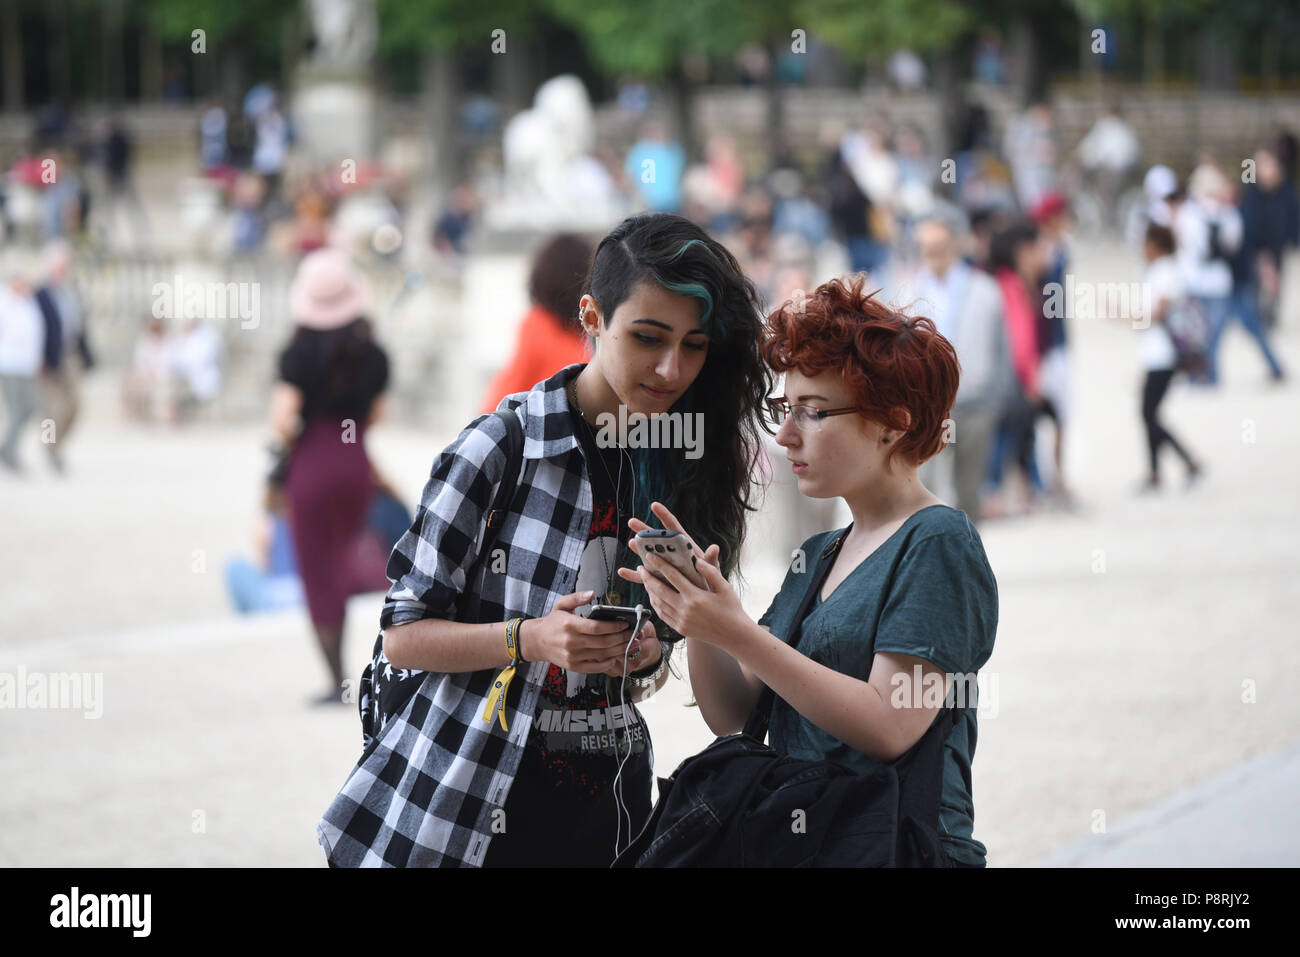 July 14, 2016 - Paris, France: French arts students Calypso (L), 17 yo, and Lorenz, 18yo, take part in a mass Pokemon hunt in the Luxembourg Garden in central Paris. Hundreds of players of the new Pokemon Go game showed up to take part in a massive hunt despite the authorities' attempt to cancel the event. Despite playing mostly solo, the Pokemon Go users enjoyed to interact and meet other players. Millions of users have already downloaded the game, which requires users to catch on-screen pokemon characters using their real-world location.  Des jeunes participent a une chasse au Pokemons dans  Stock Photo